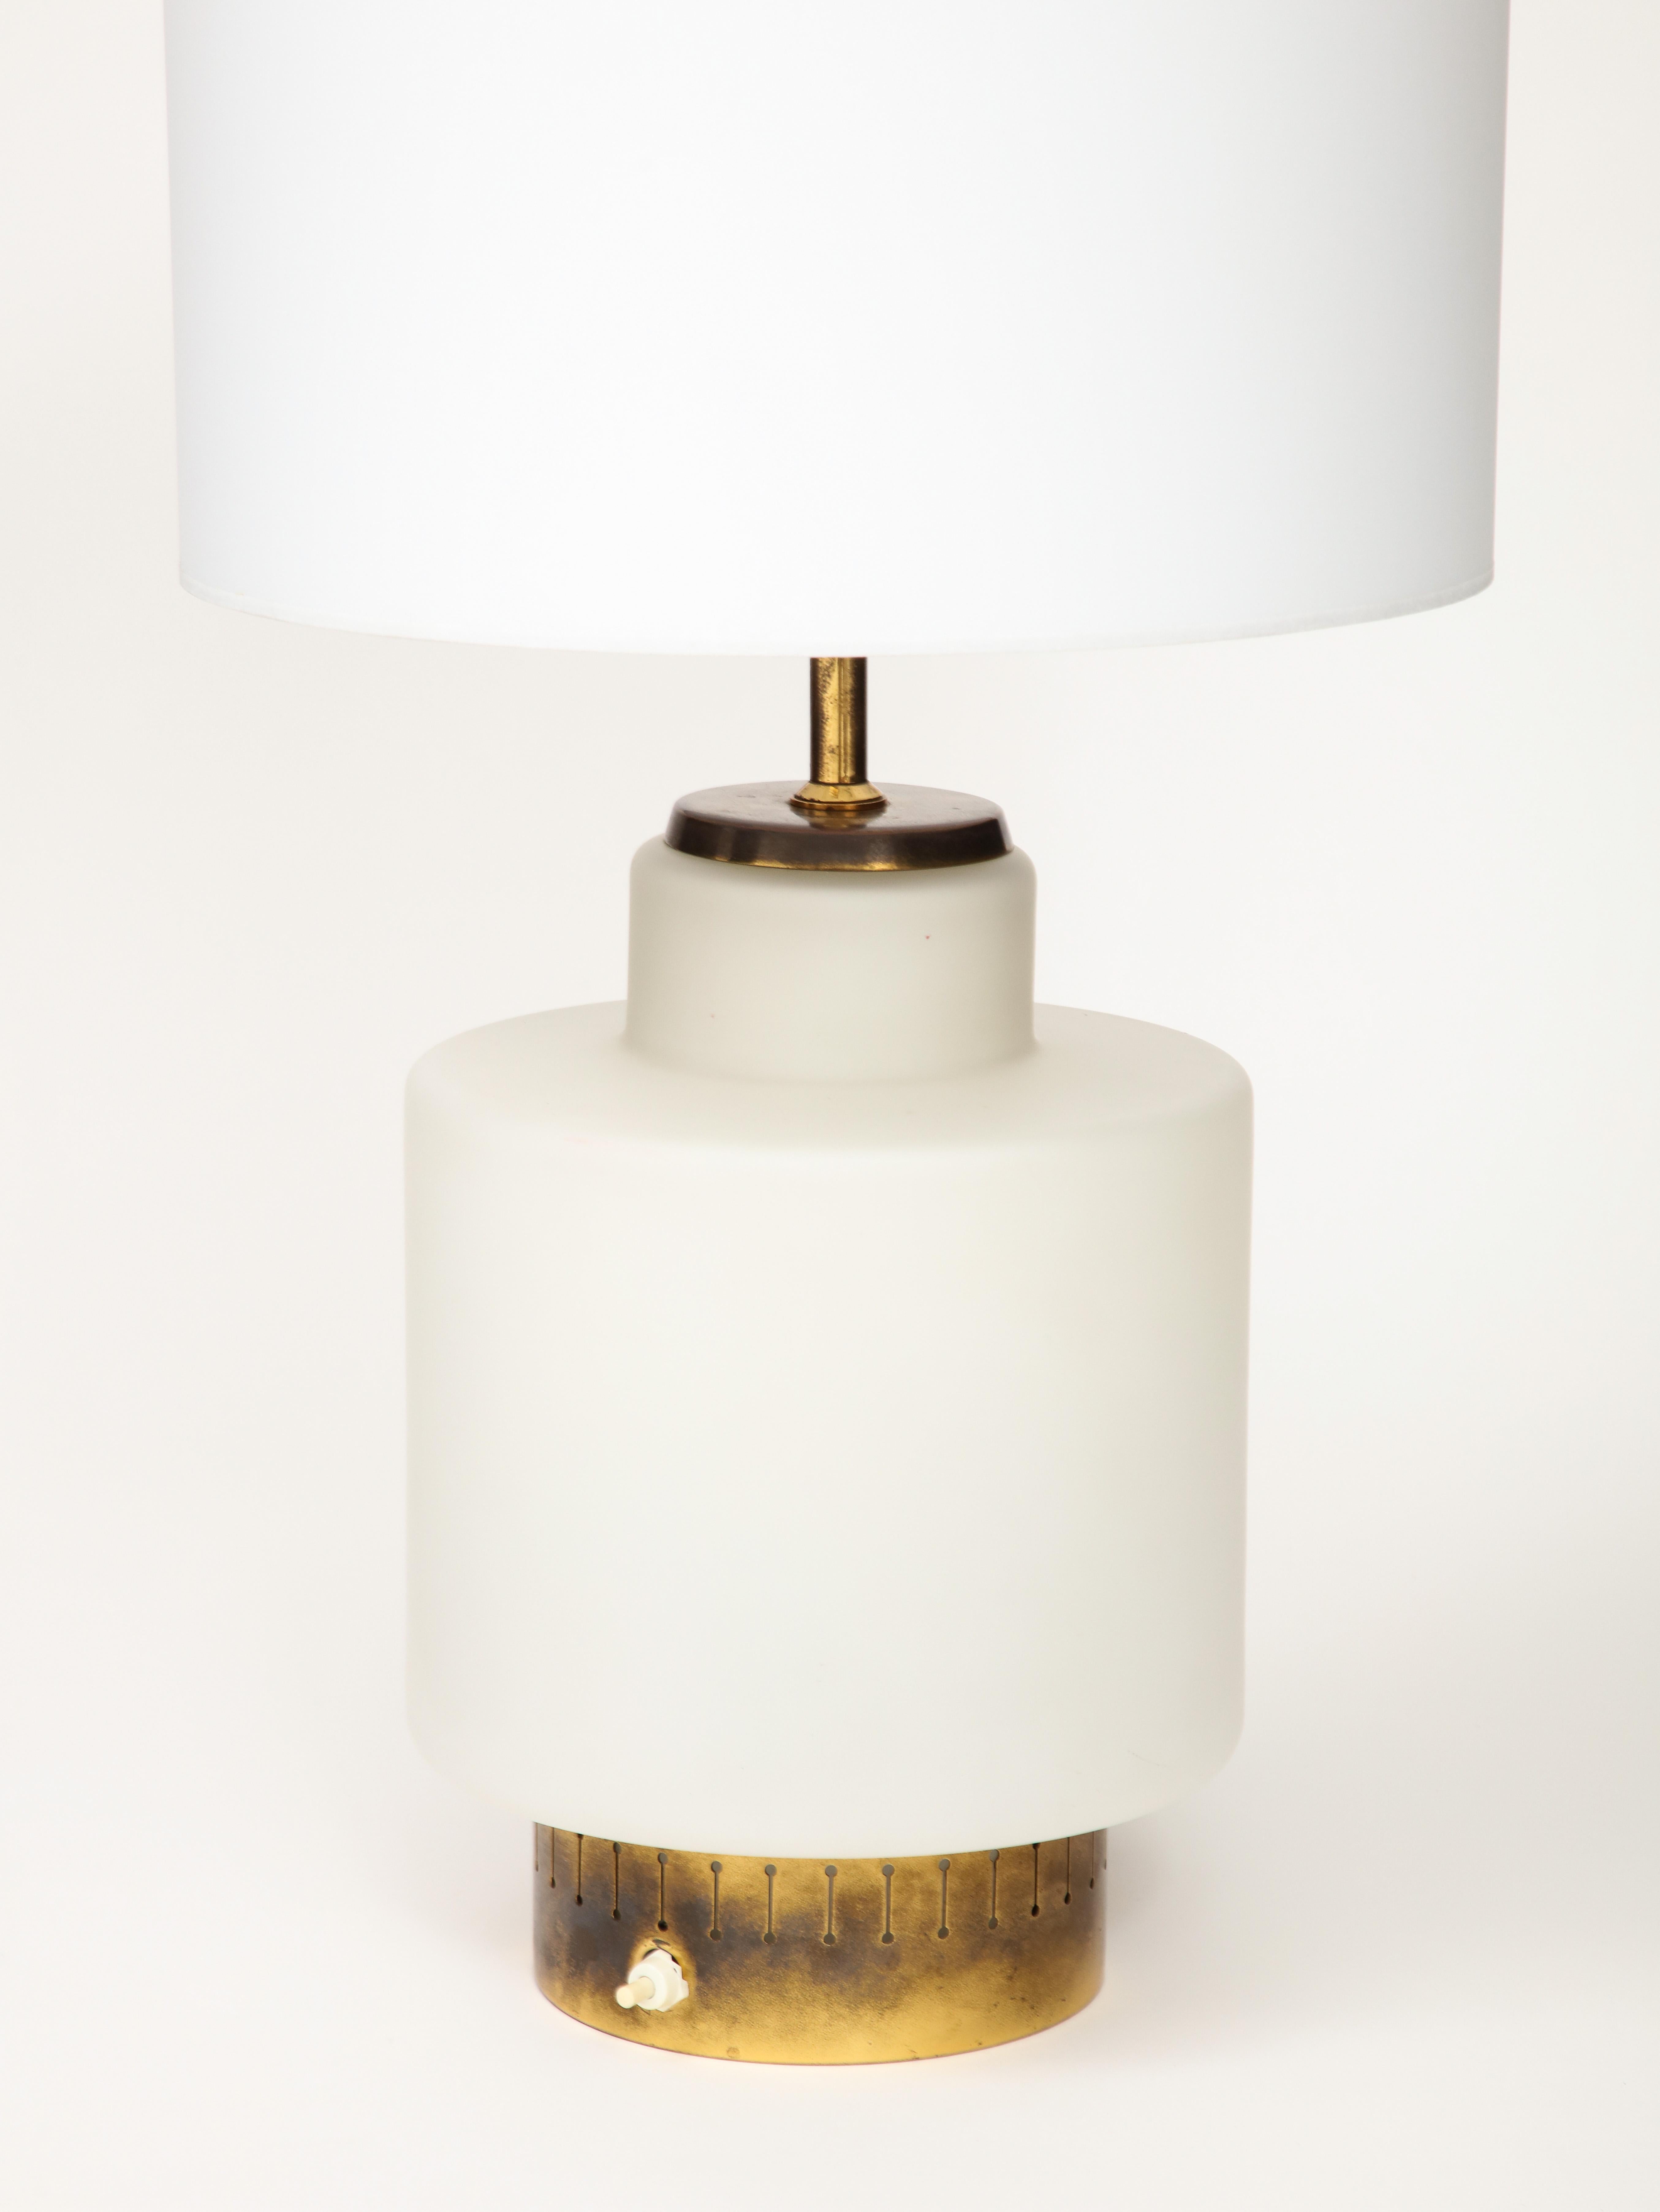 Stilnovo Opaline & Brass Lamp, mod. 8055, Parchment Shade, Italy, c. 1950's In Good Condition For Sale In Brooklyn, NY